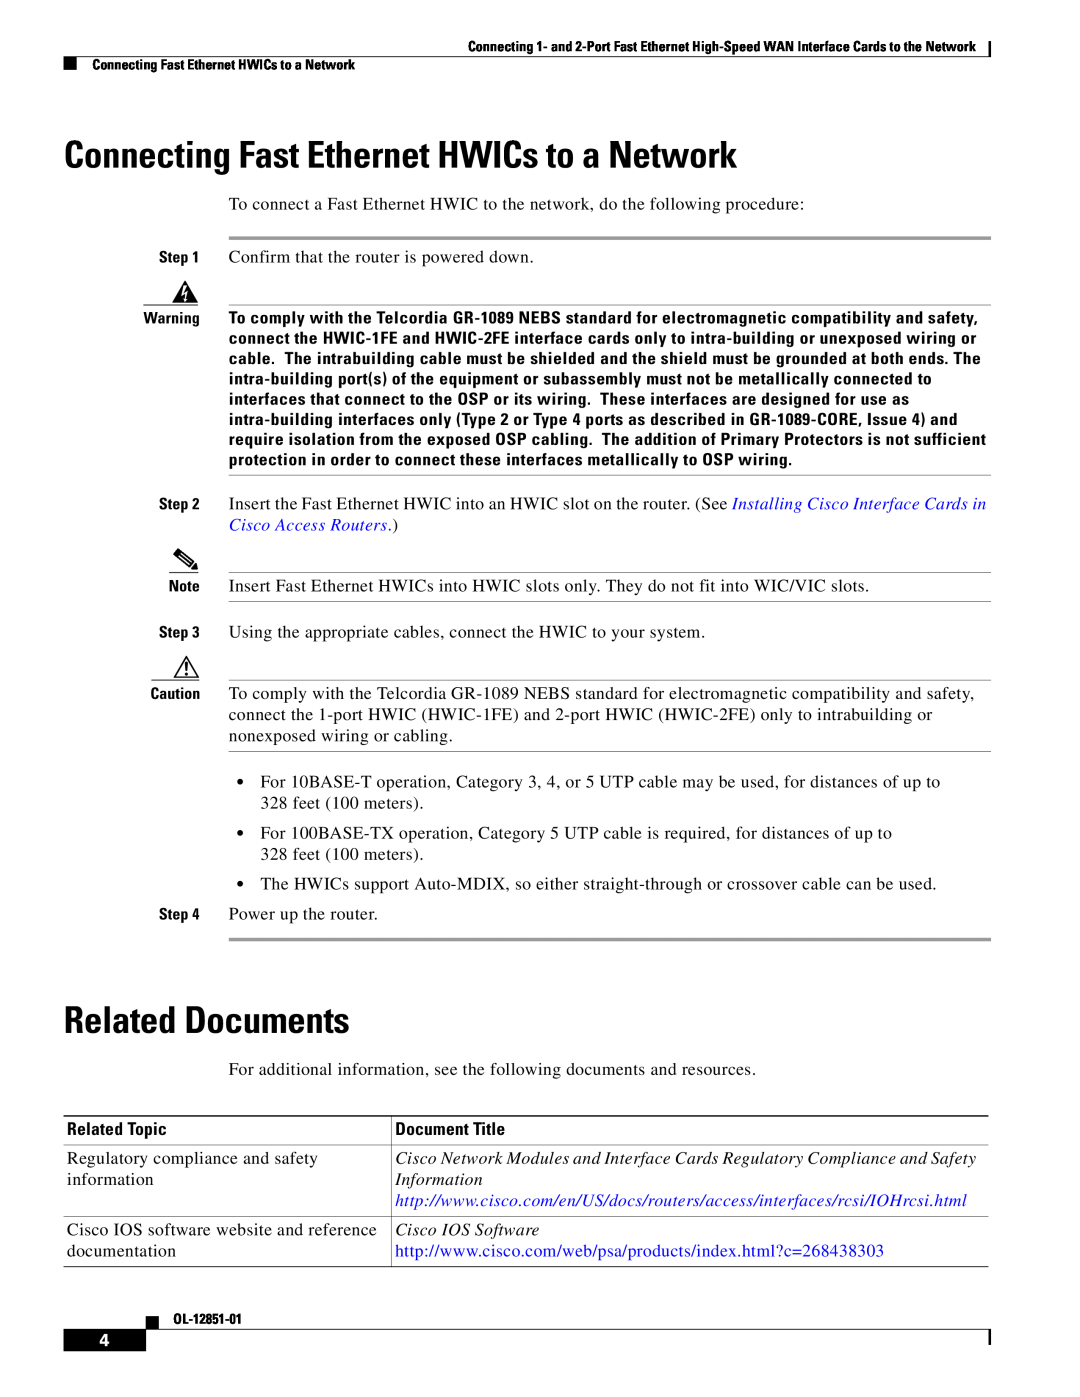 Cisco Systems HWIC1FERF Connecting Fast Ethernet HWICs to a Network, Related Documents, Related Topic, Document Title 